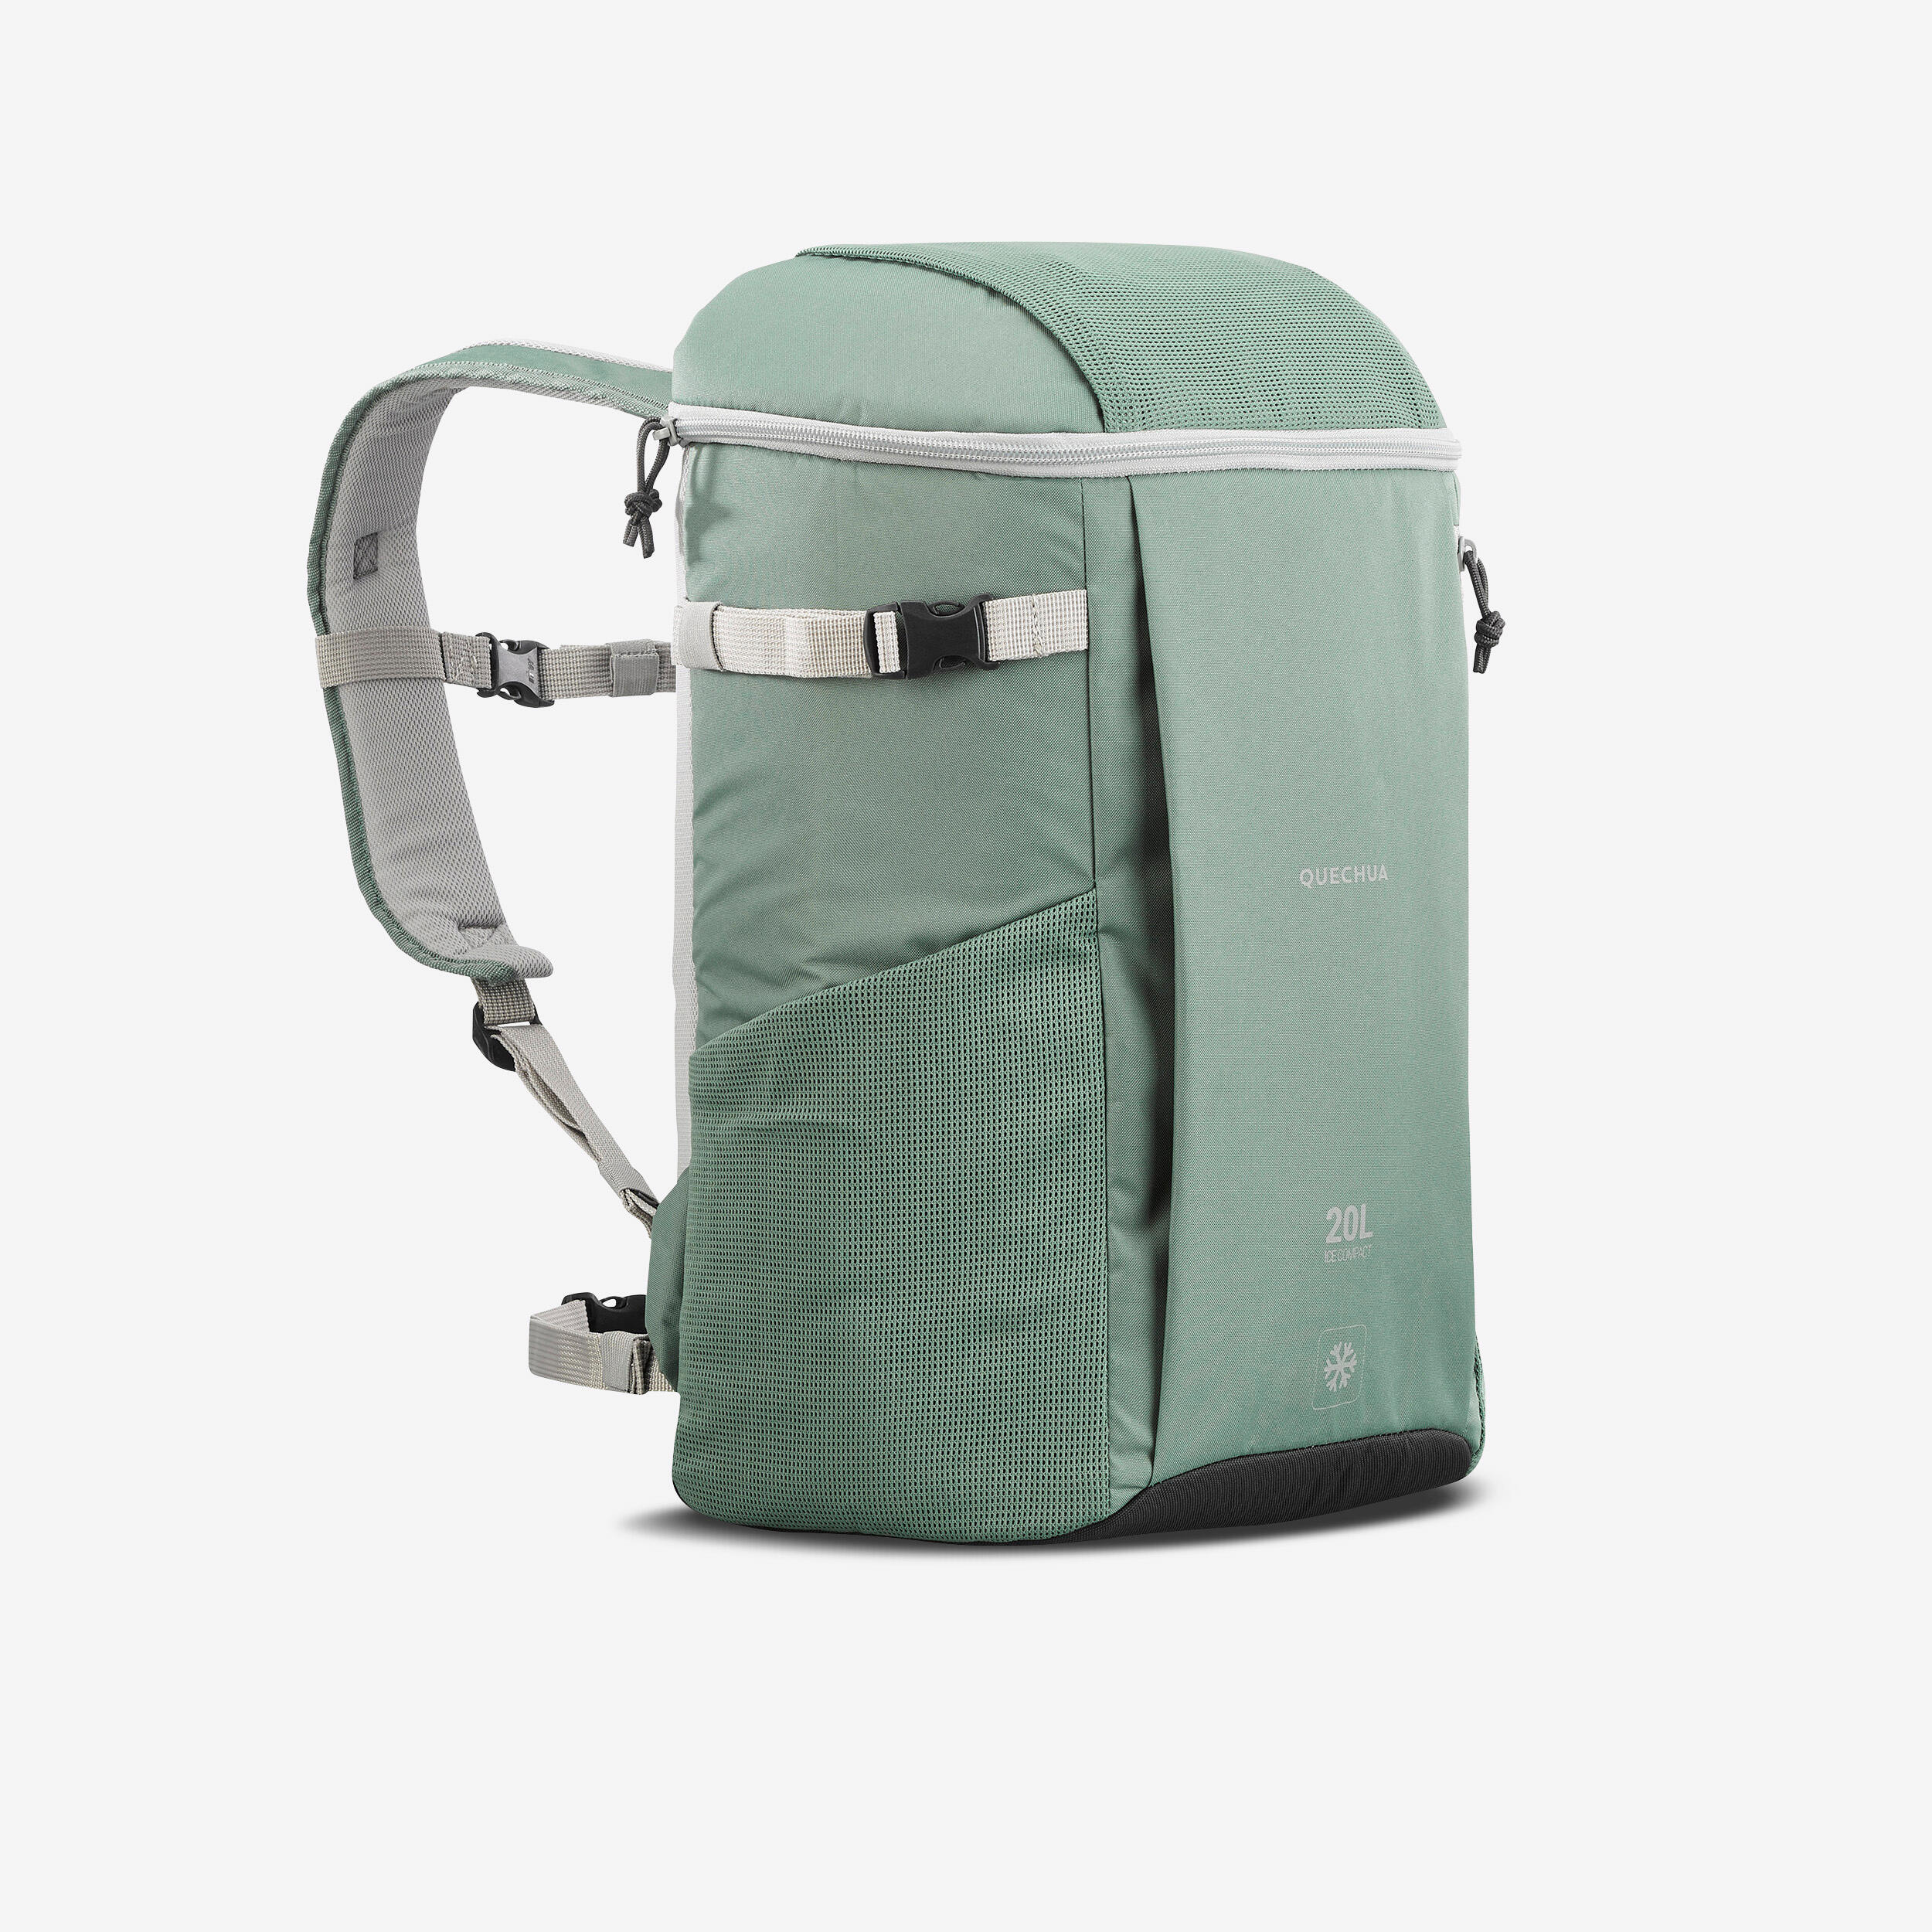 sac à dos isotherme 20l - nh ice compact 100 - quechua